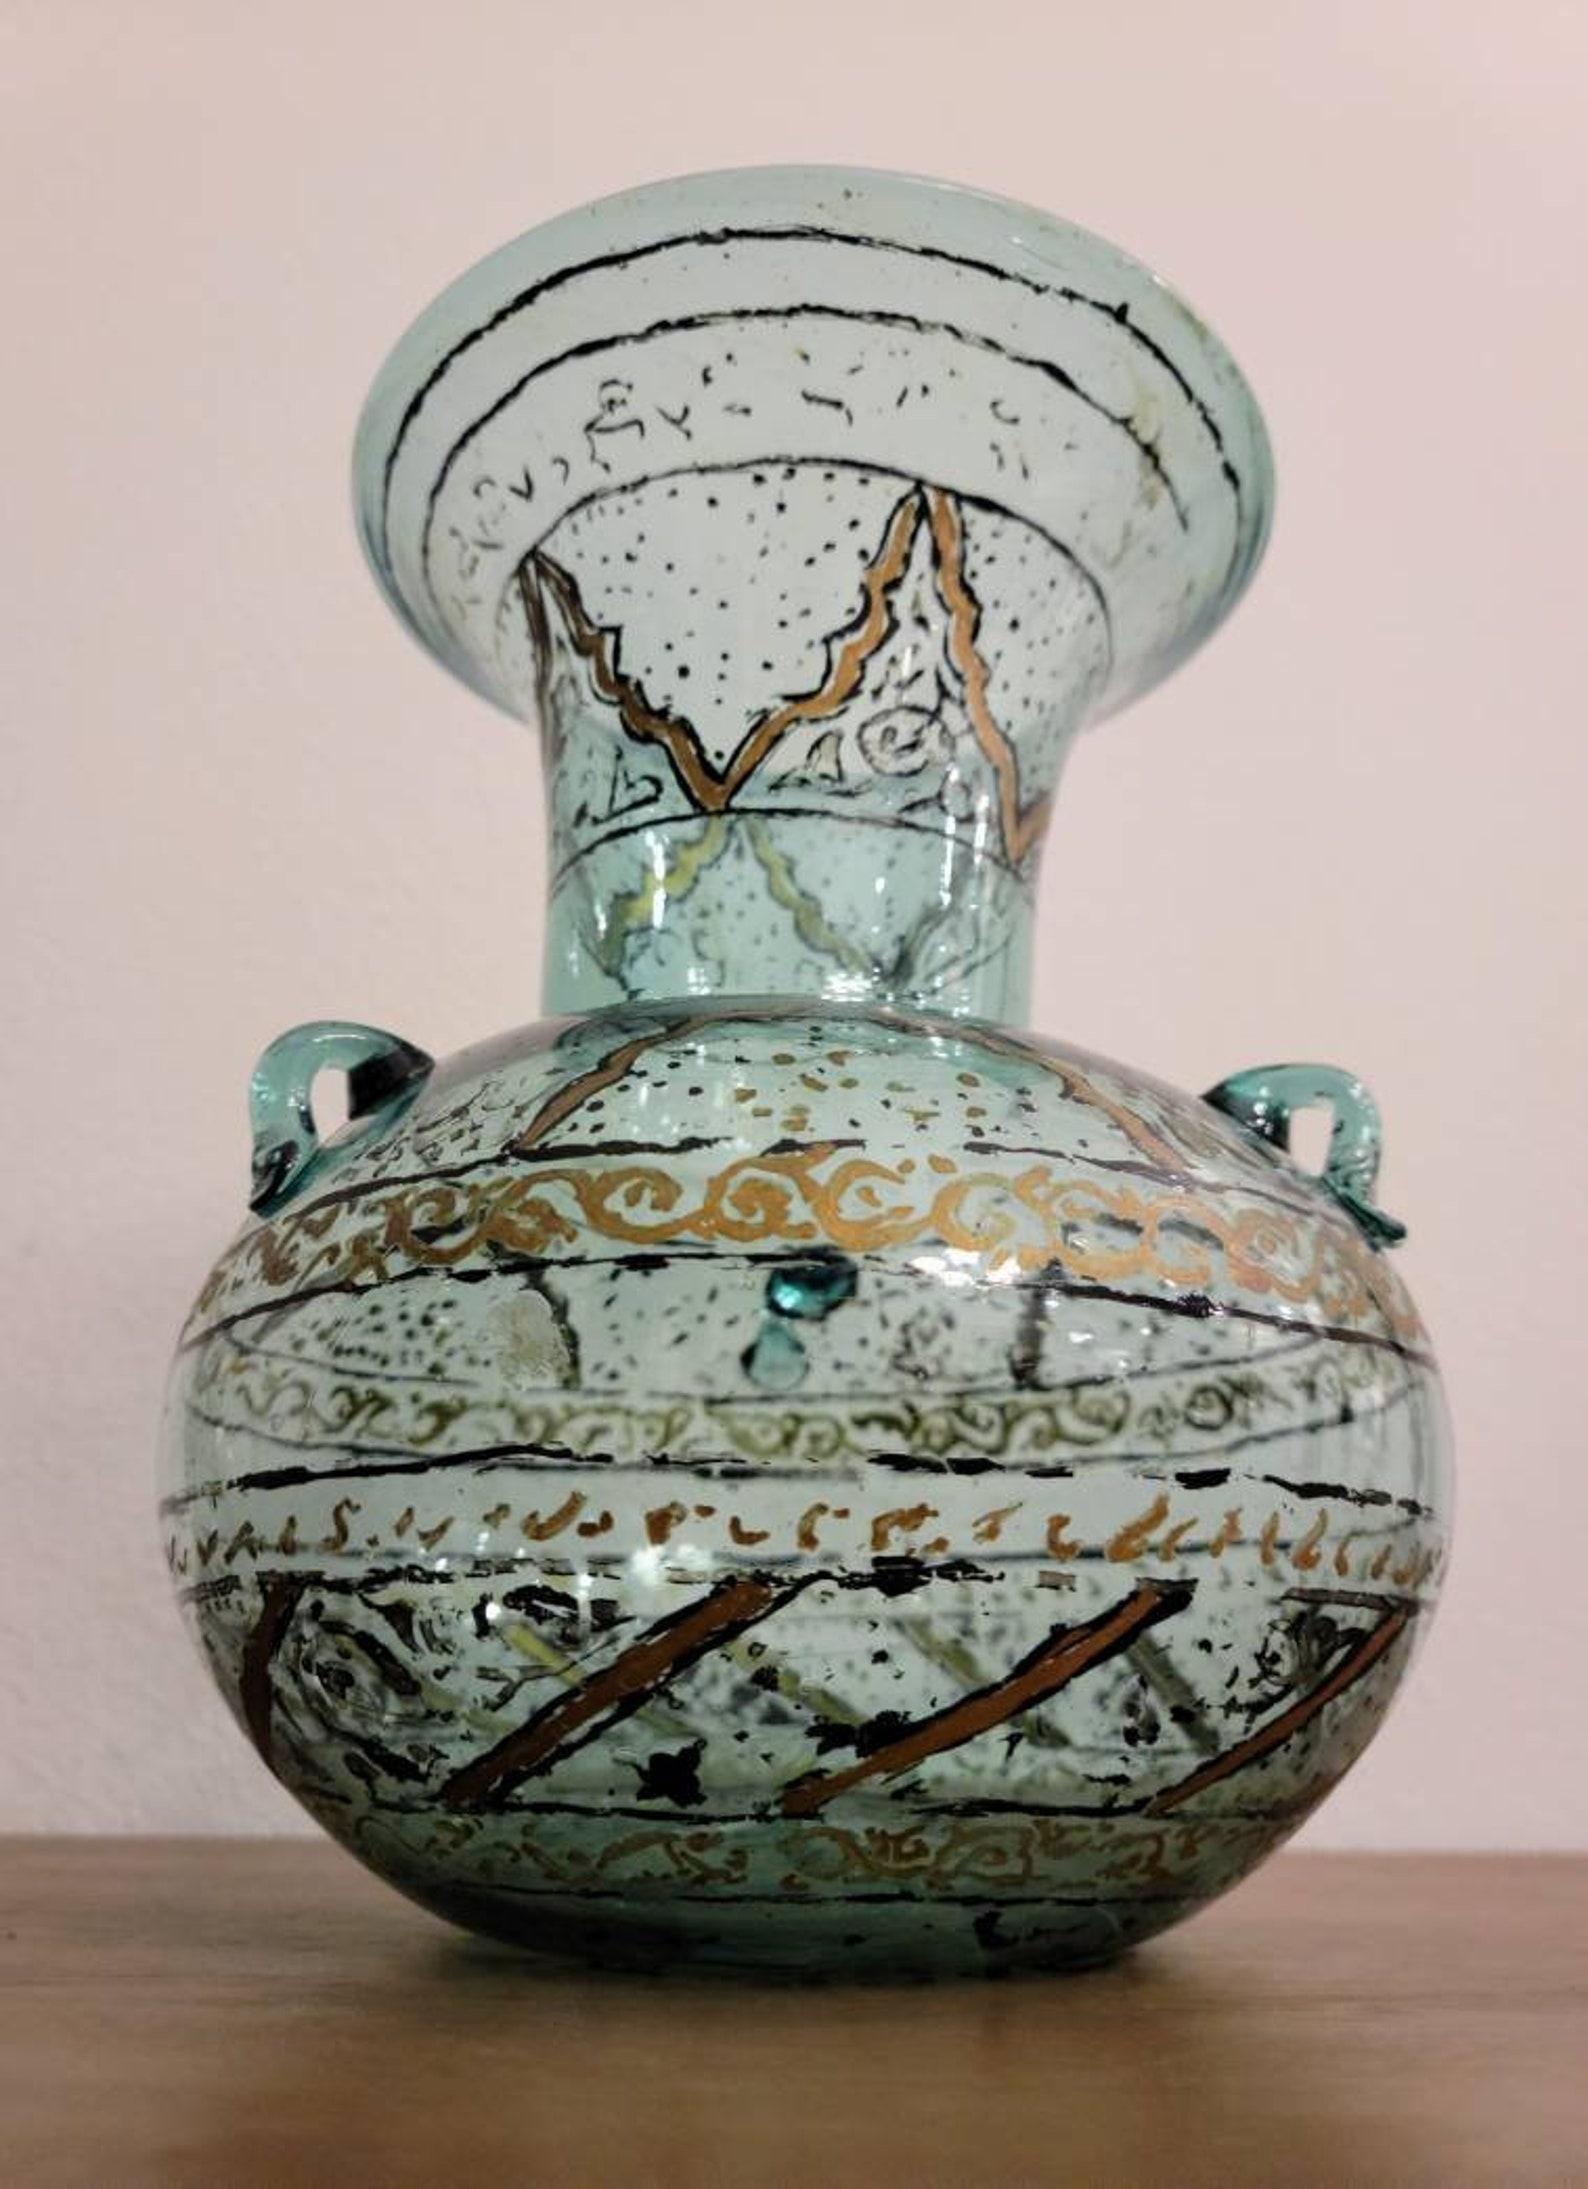 A scarce antique, circa 1785, Middle Eastern hand painted and blown glass Mosque lamp, 18th / early 19th century, the stunning blue glass mosque oil lamp having a large flared rim, over bulbous body, with three glass handles to the body used for